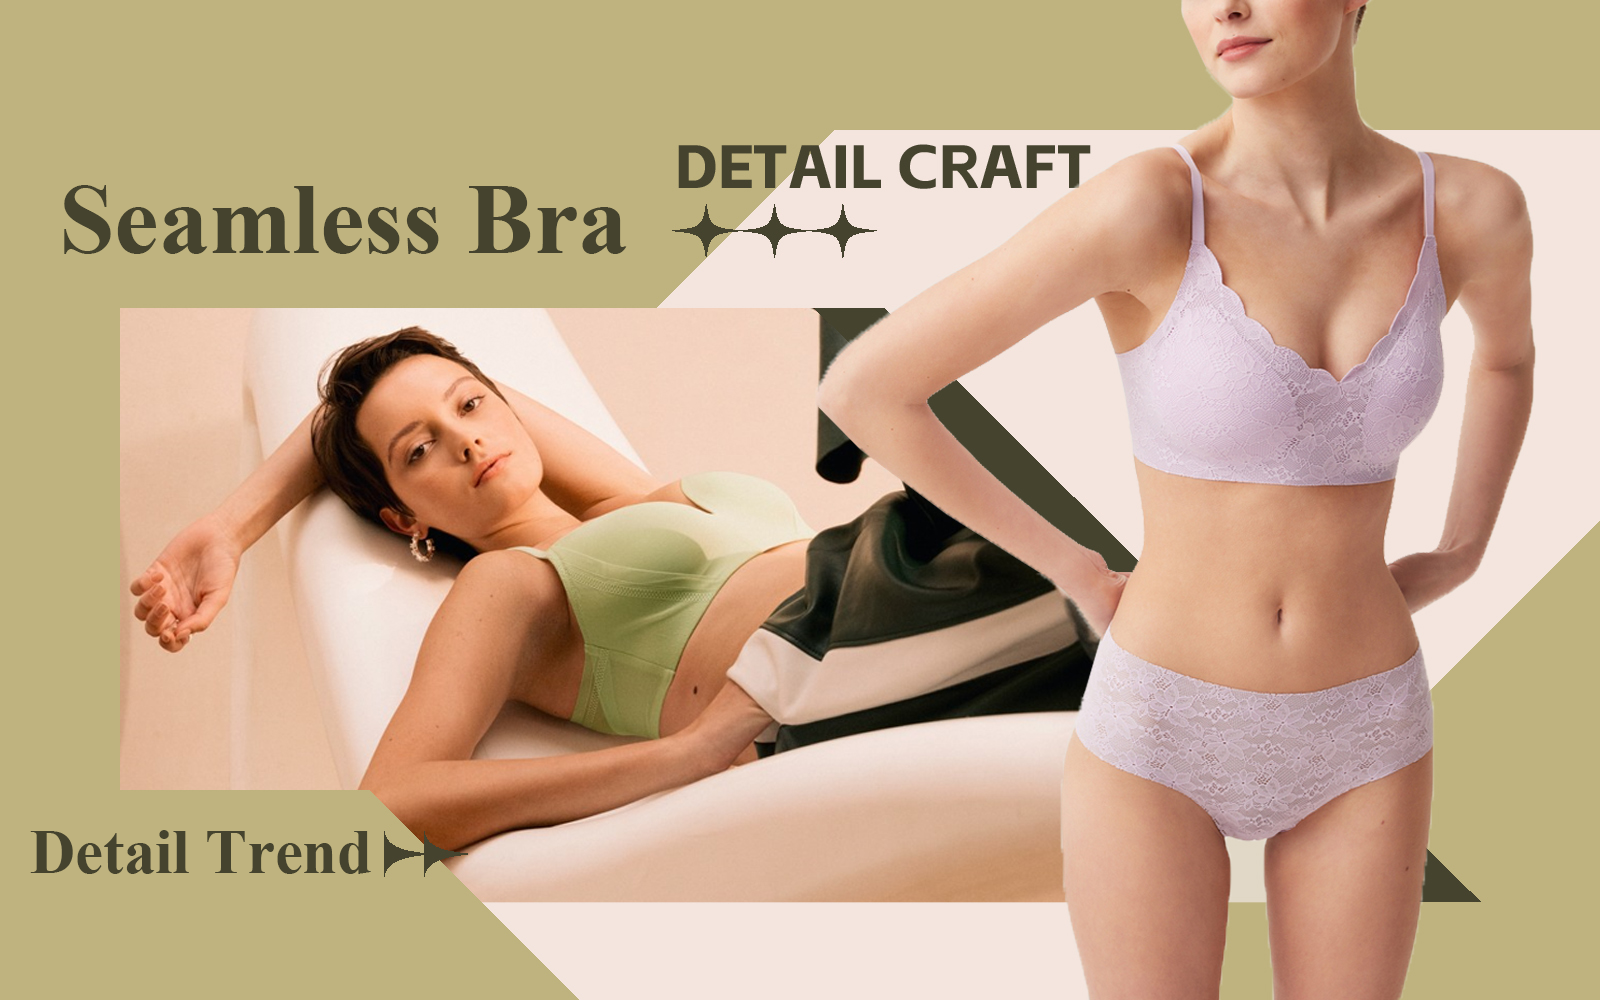 The Detail & Craft Trend for Women's Seamless Bra